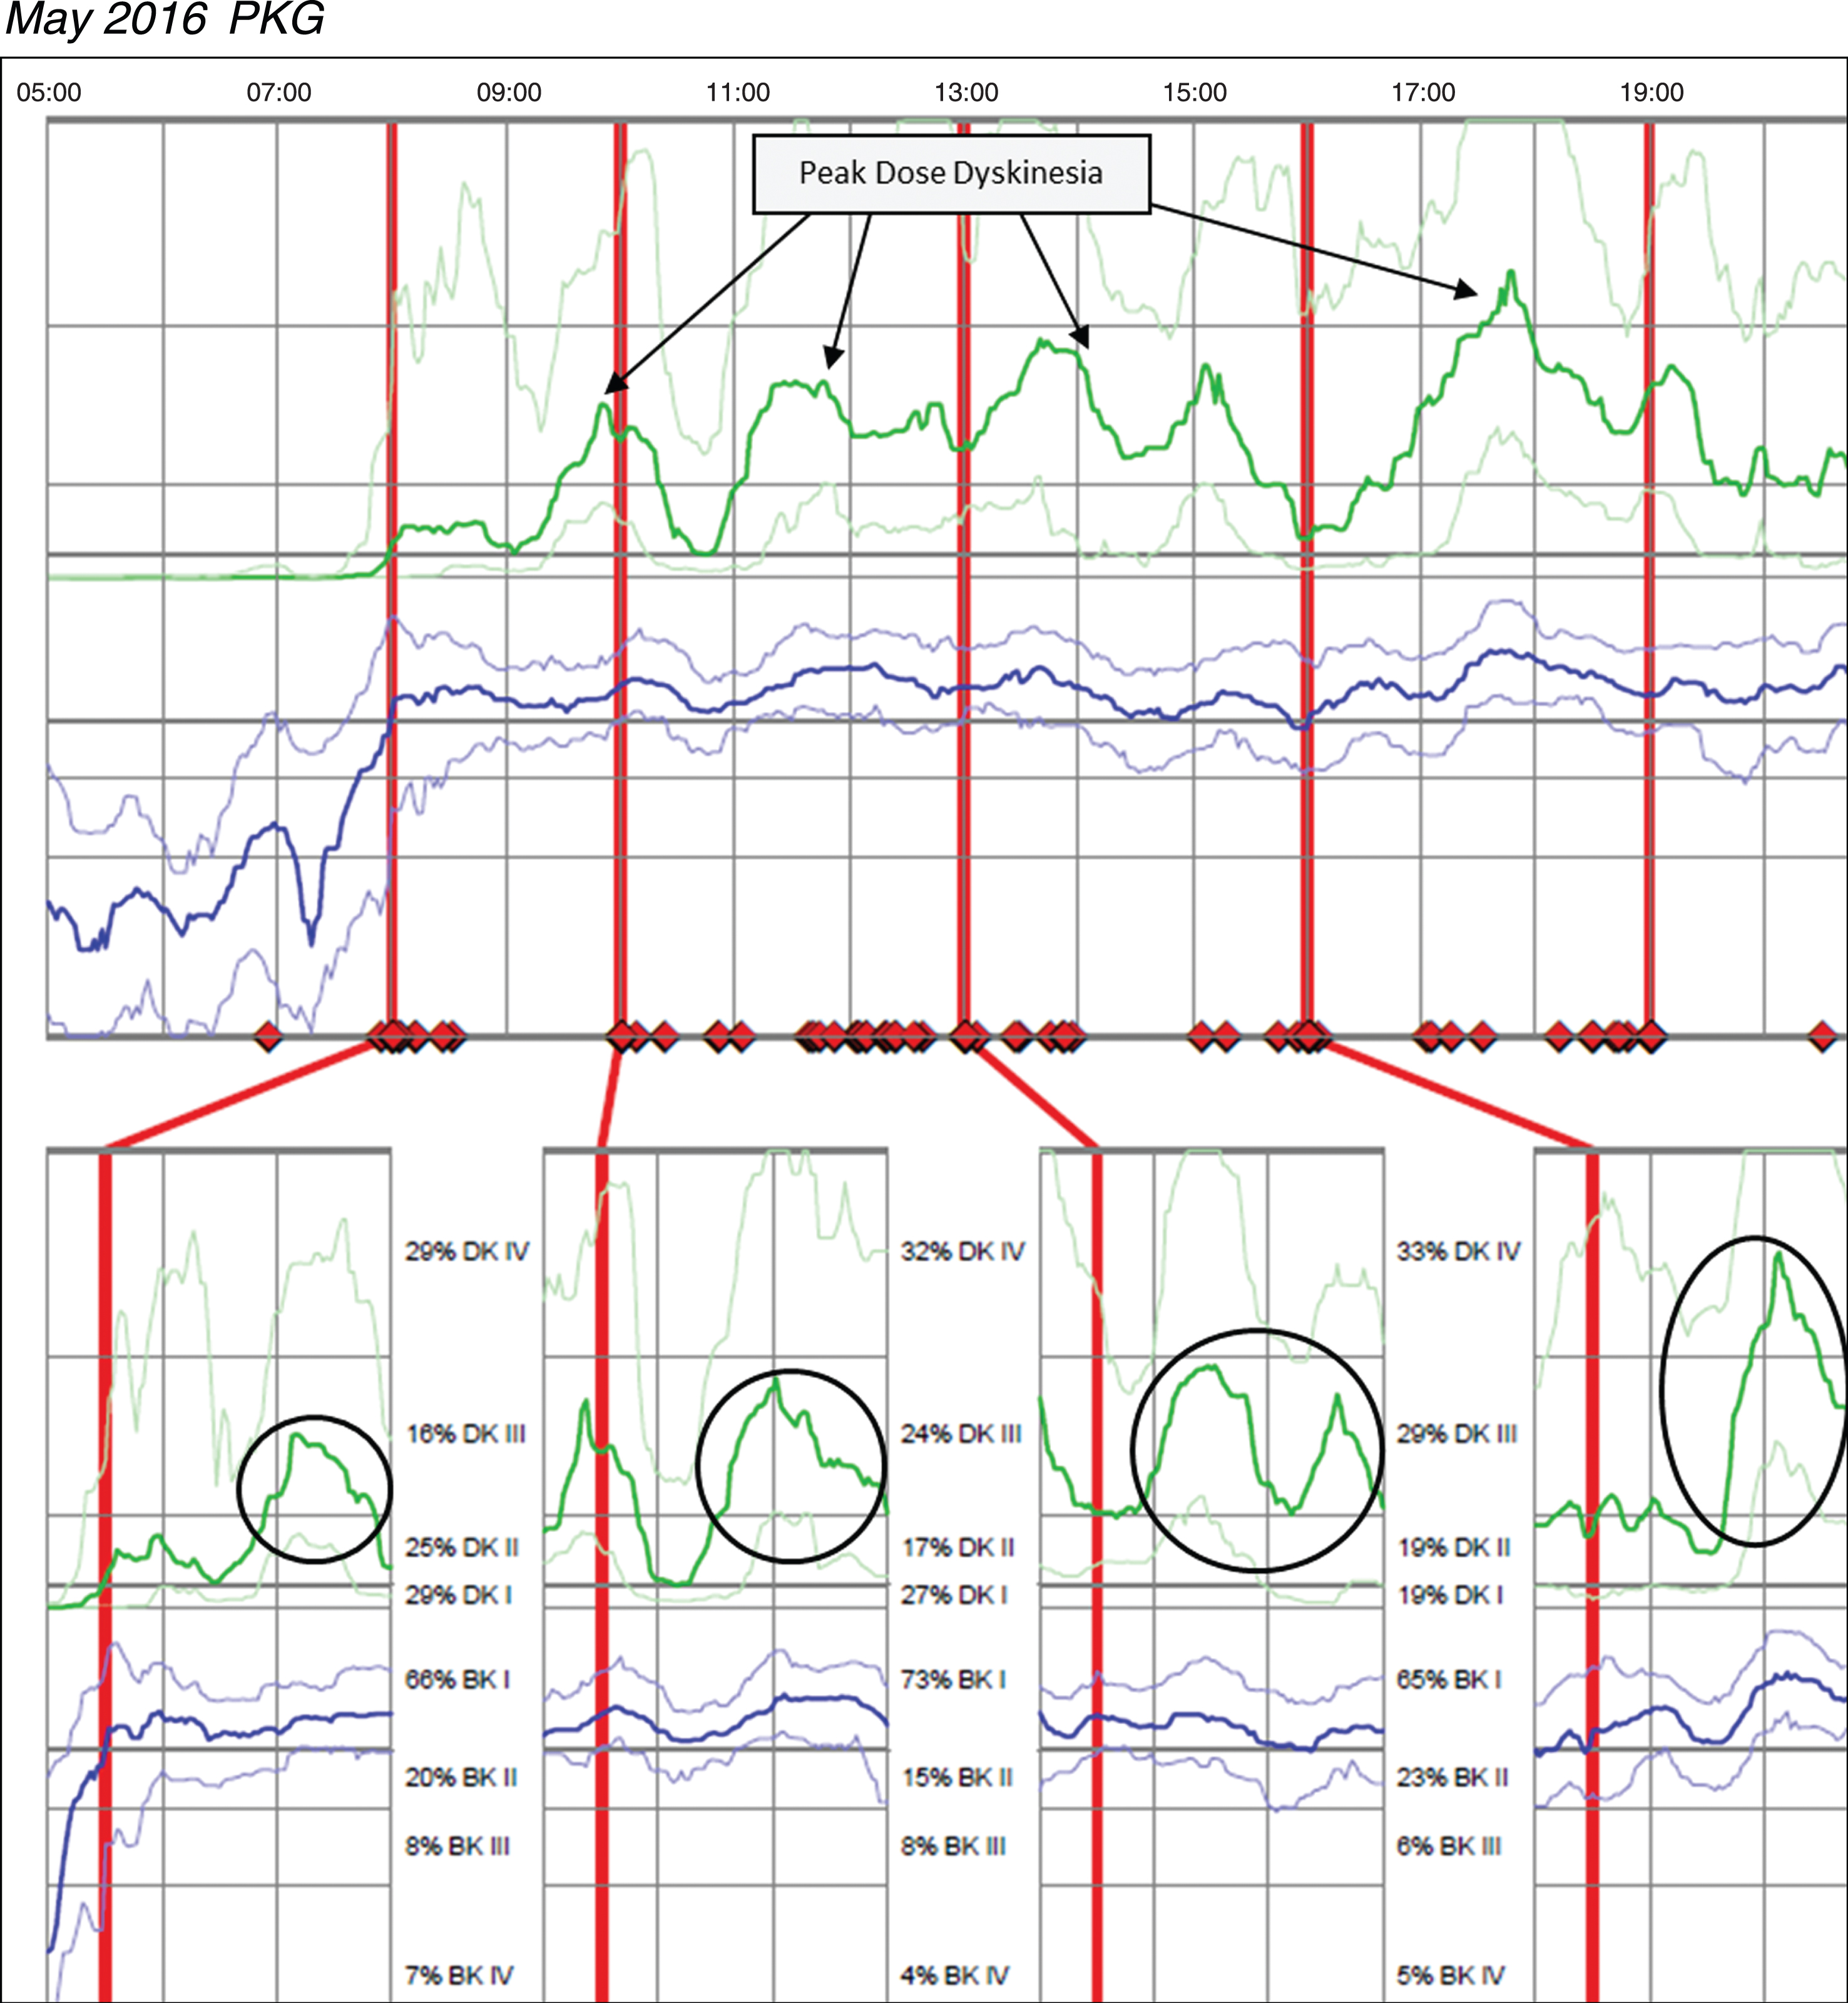 Patient 145 May 2016 PKG. PKG Summary Plot depicts peak dose dyskinesia. Top Image - PKG Summary Plot: Depicts data from all recording day aligned to the time of day. It shows when reminders were given (vertical red lines), the median DKS (heavy green line) and median BKS (heavy blue line) and their corresponding 25th and 75th percentiles plotted against time of day. Bottom Image - PKG Dose Response Curves: Depicts data from recording day aligned to the time of medication acknowledgement for each individual dose. Programmed medication doses are depicted by vertical red lines. Also illustrated are the median DKS (heavy green line) and median BKS (heavy blue line) and their corresponding 25th and 75th percentiles plotted against time of day.